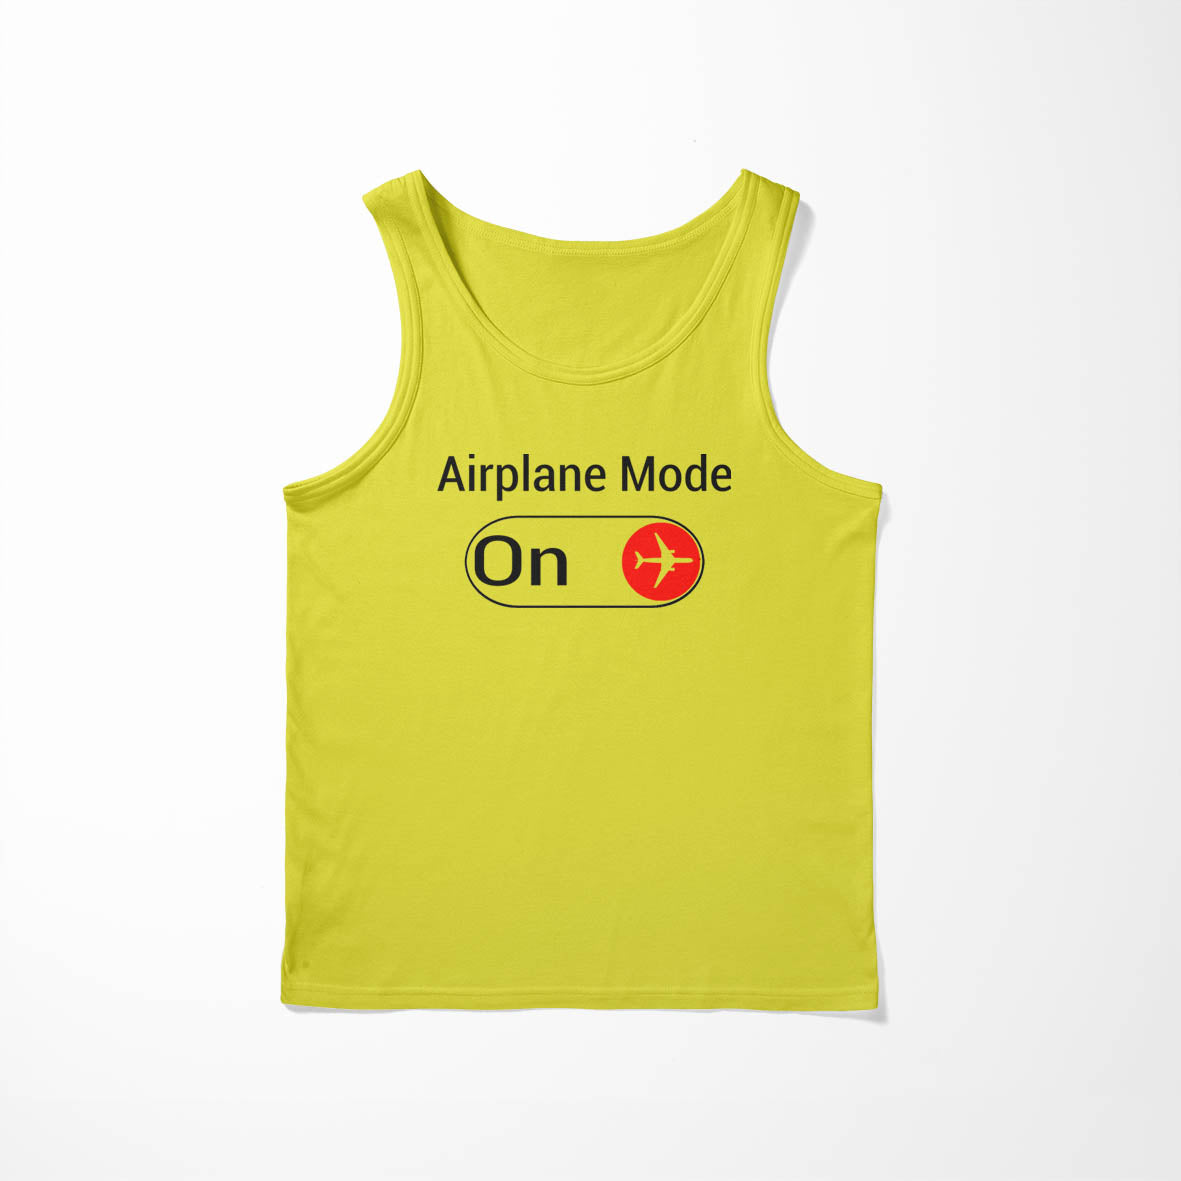 Airplane Mode On Designed Tank Tops